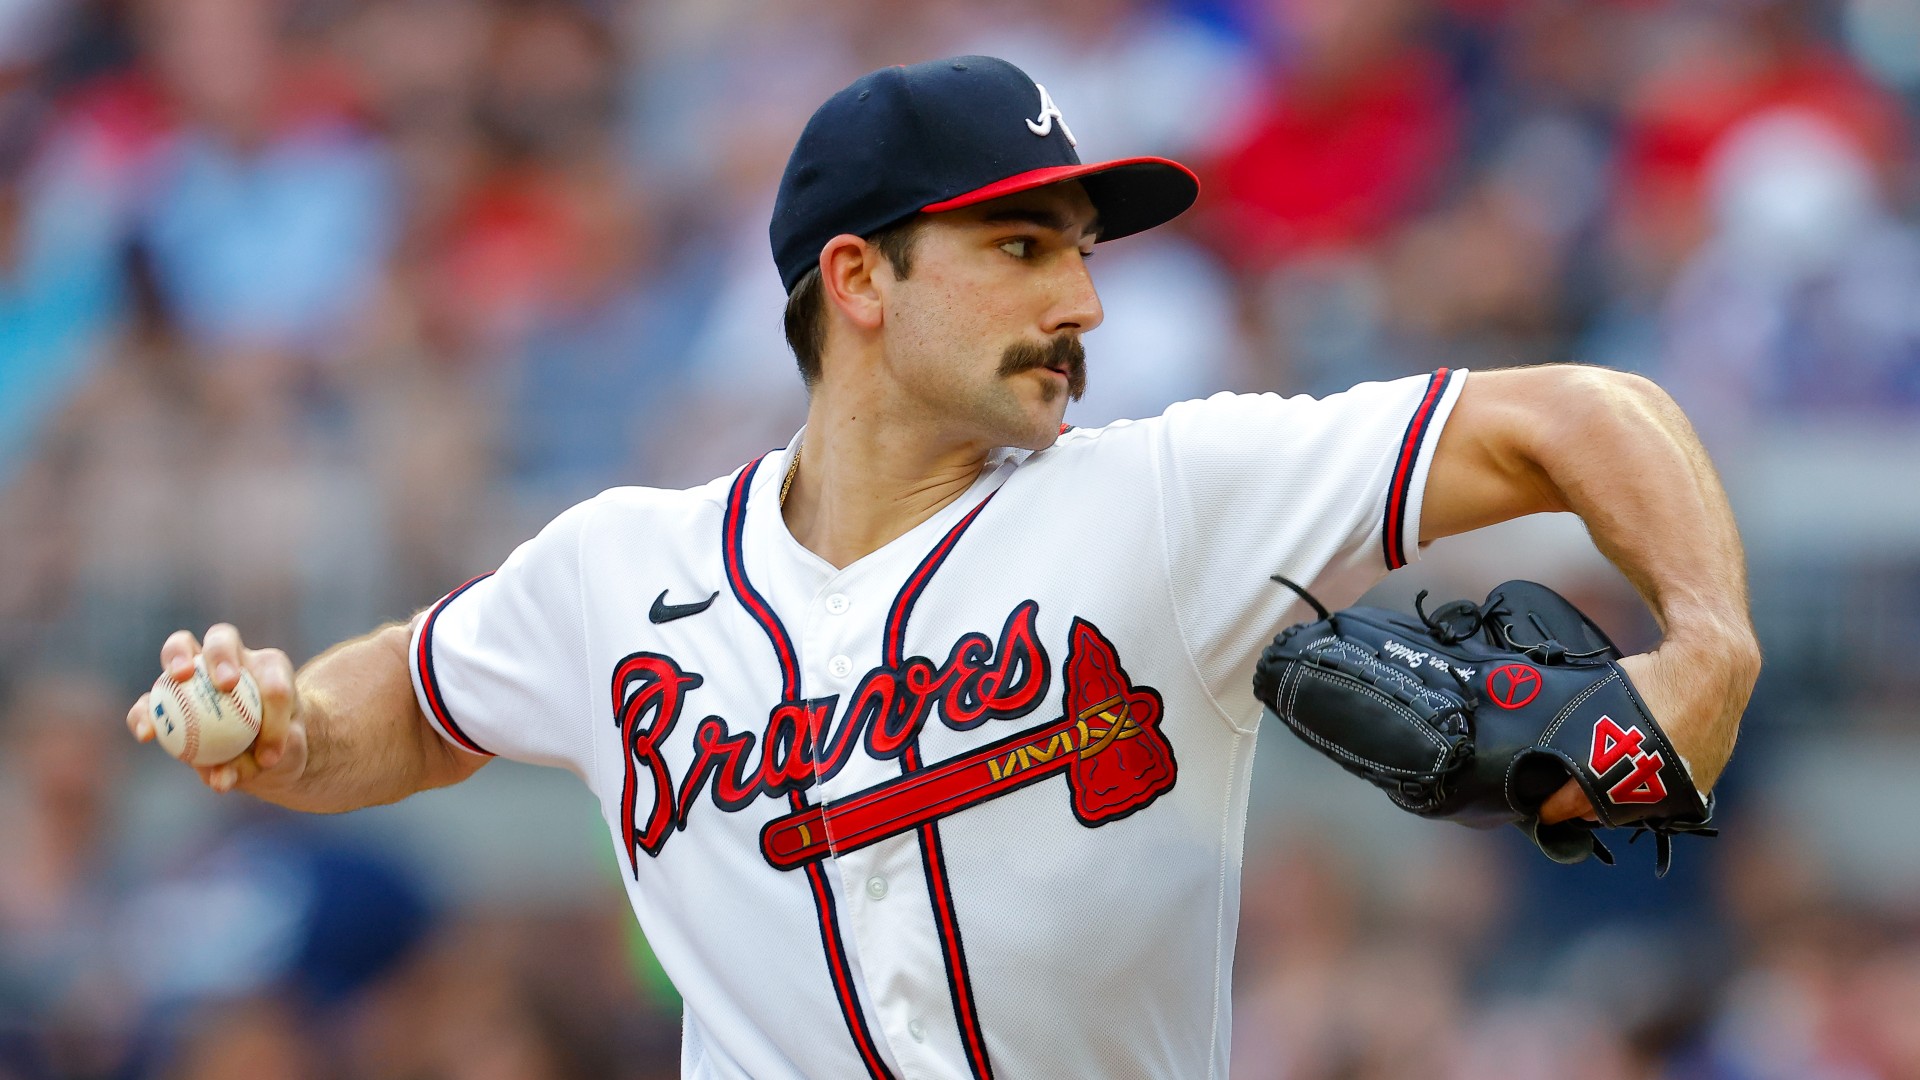 Braves vs. Phillies MLB Odds, Pick & Preview: Baseball Gods to Shift in Atlanta’s Favor? (Tuesday, July 26) article feature image